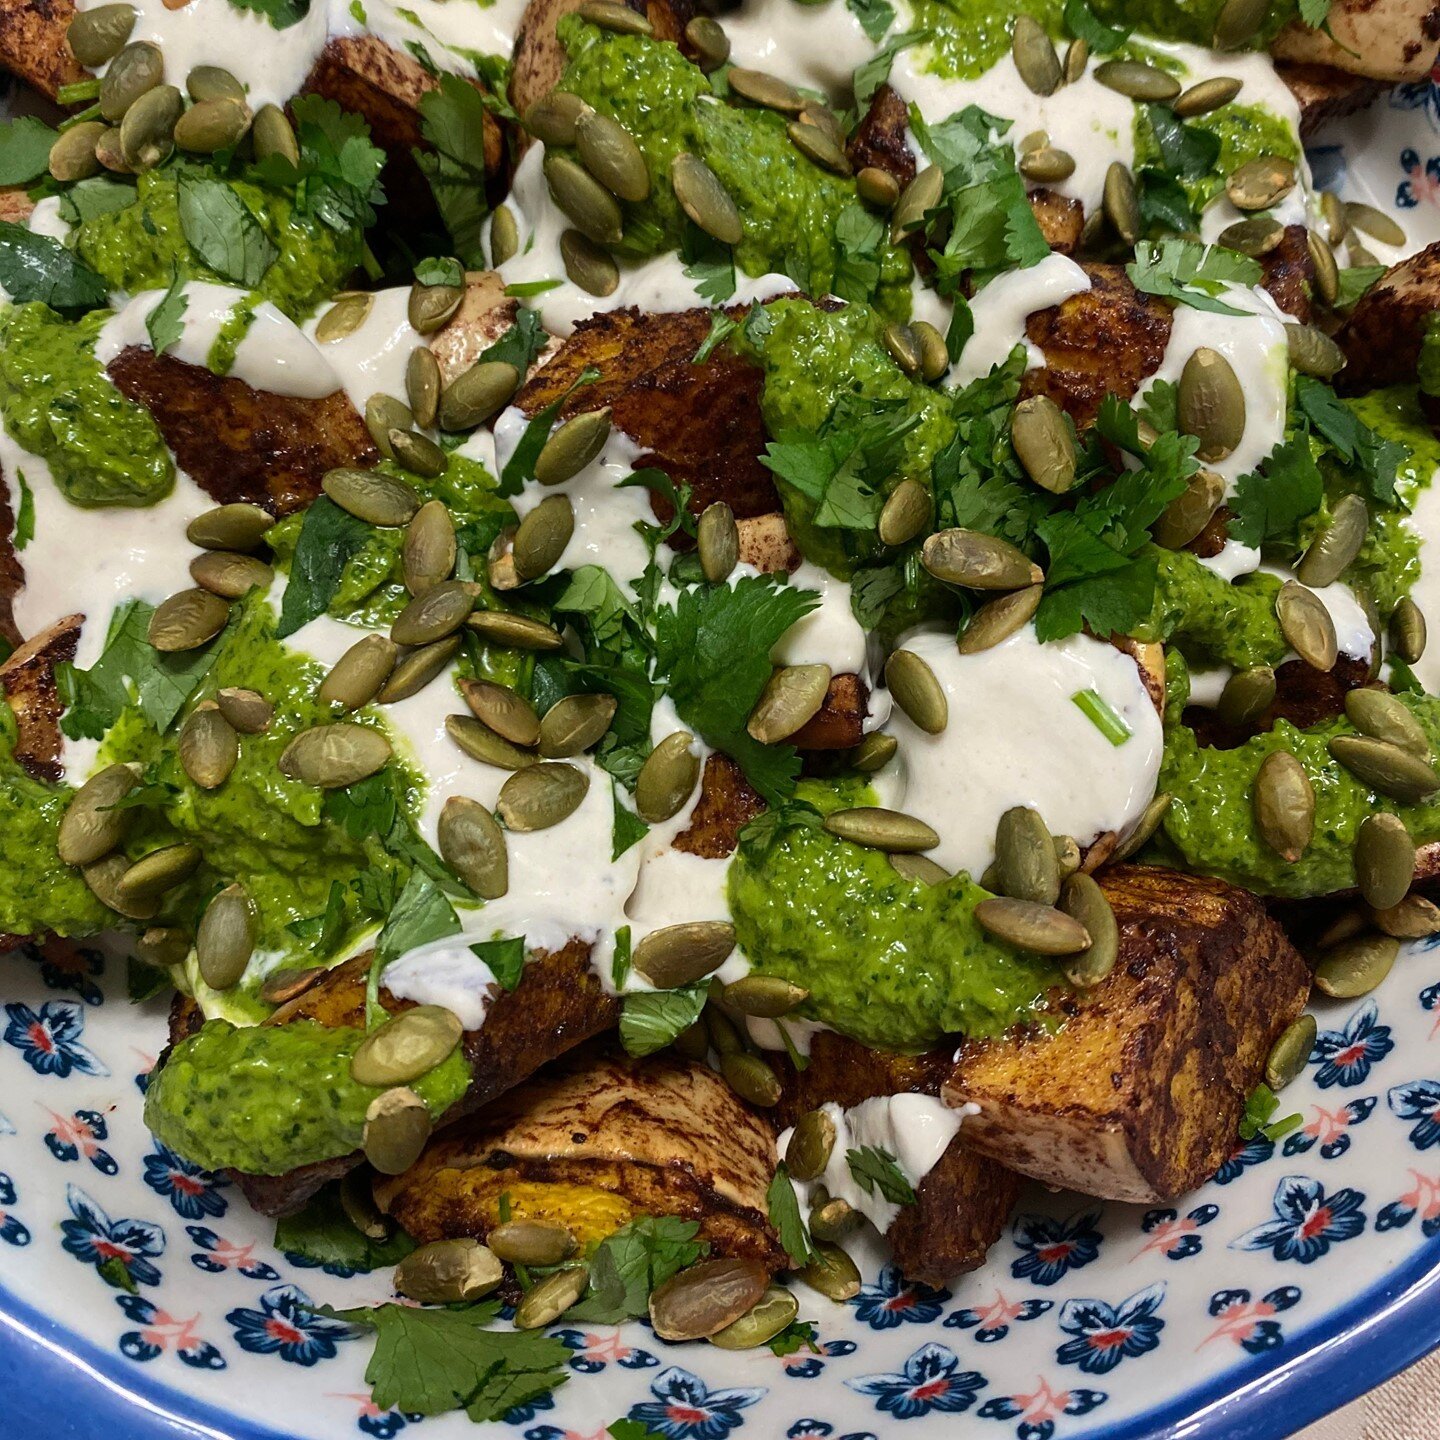 FRIDAY RECIPE - SQUASH WITH YOGHURT AND CORIANDER SAUCE⁠
⁠
After all this months chat about low GI, healthy fats, fibre and protein this weeks #fridayrecipe is a delicious low GI meal which is great for those with PCOS. The addition of pumpkin seeds 